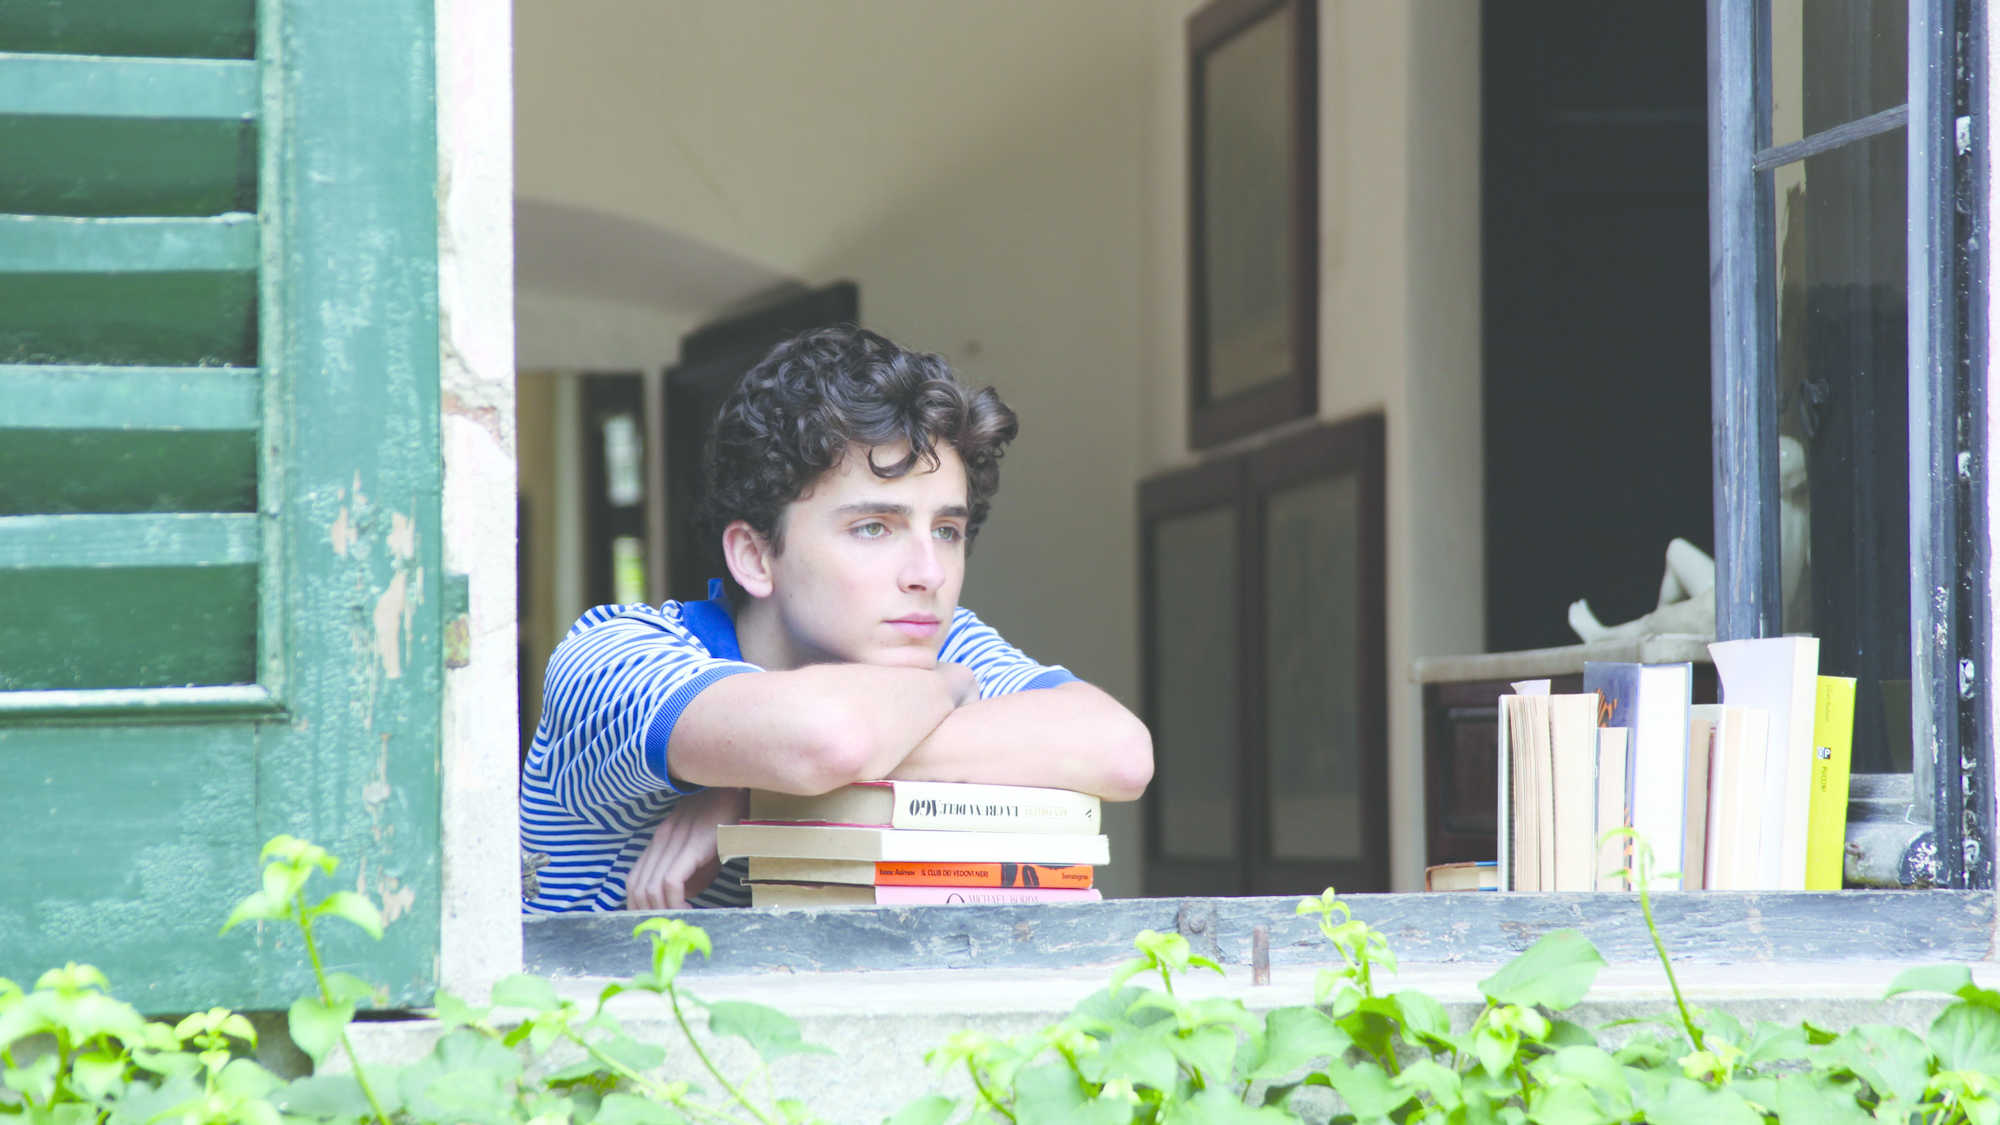 Call Me by Your Name (image 3)